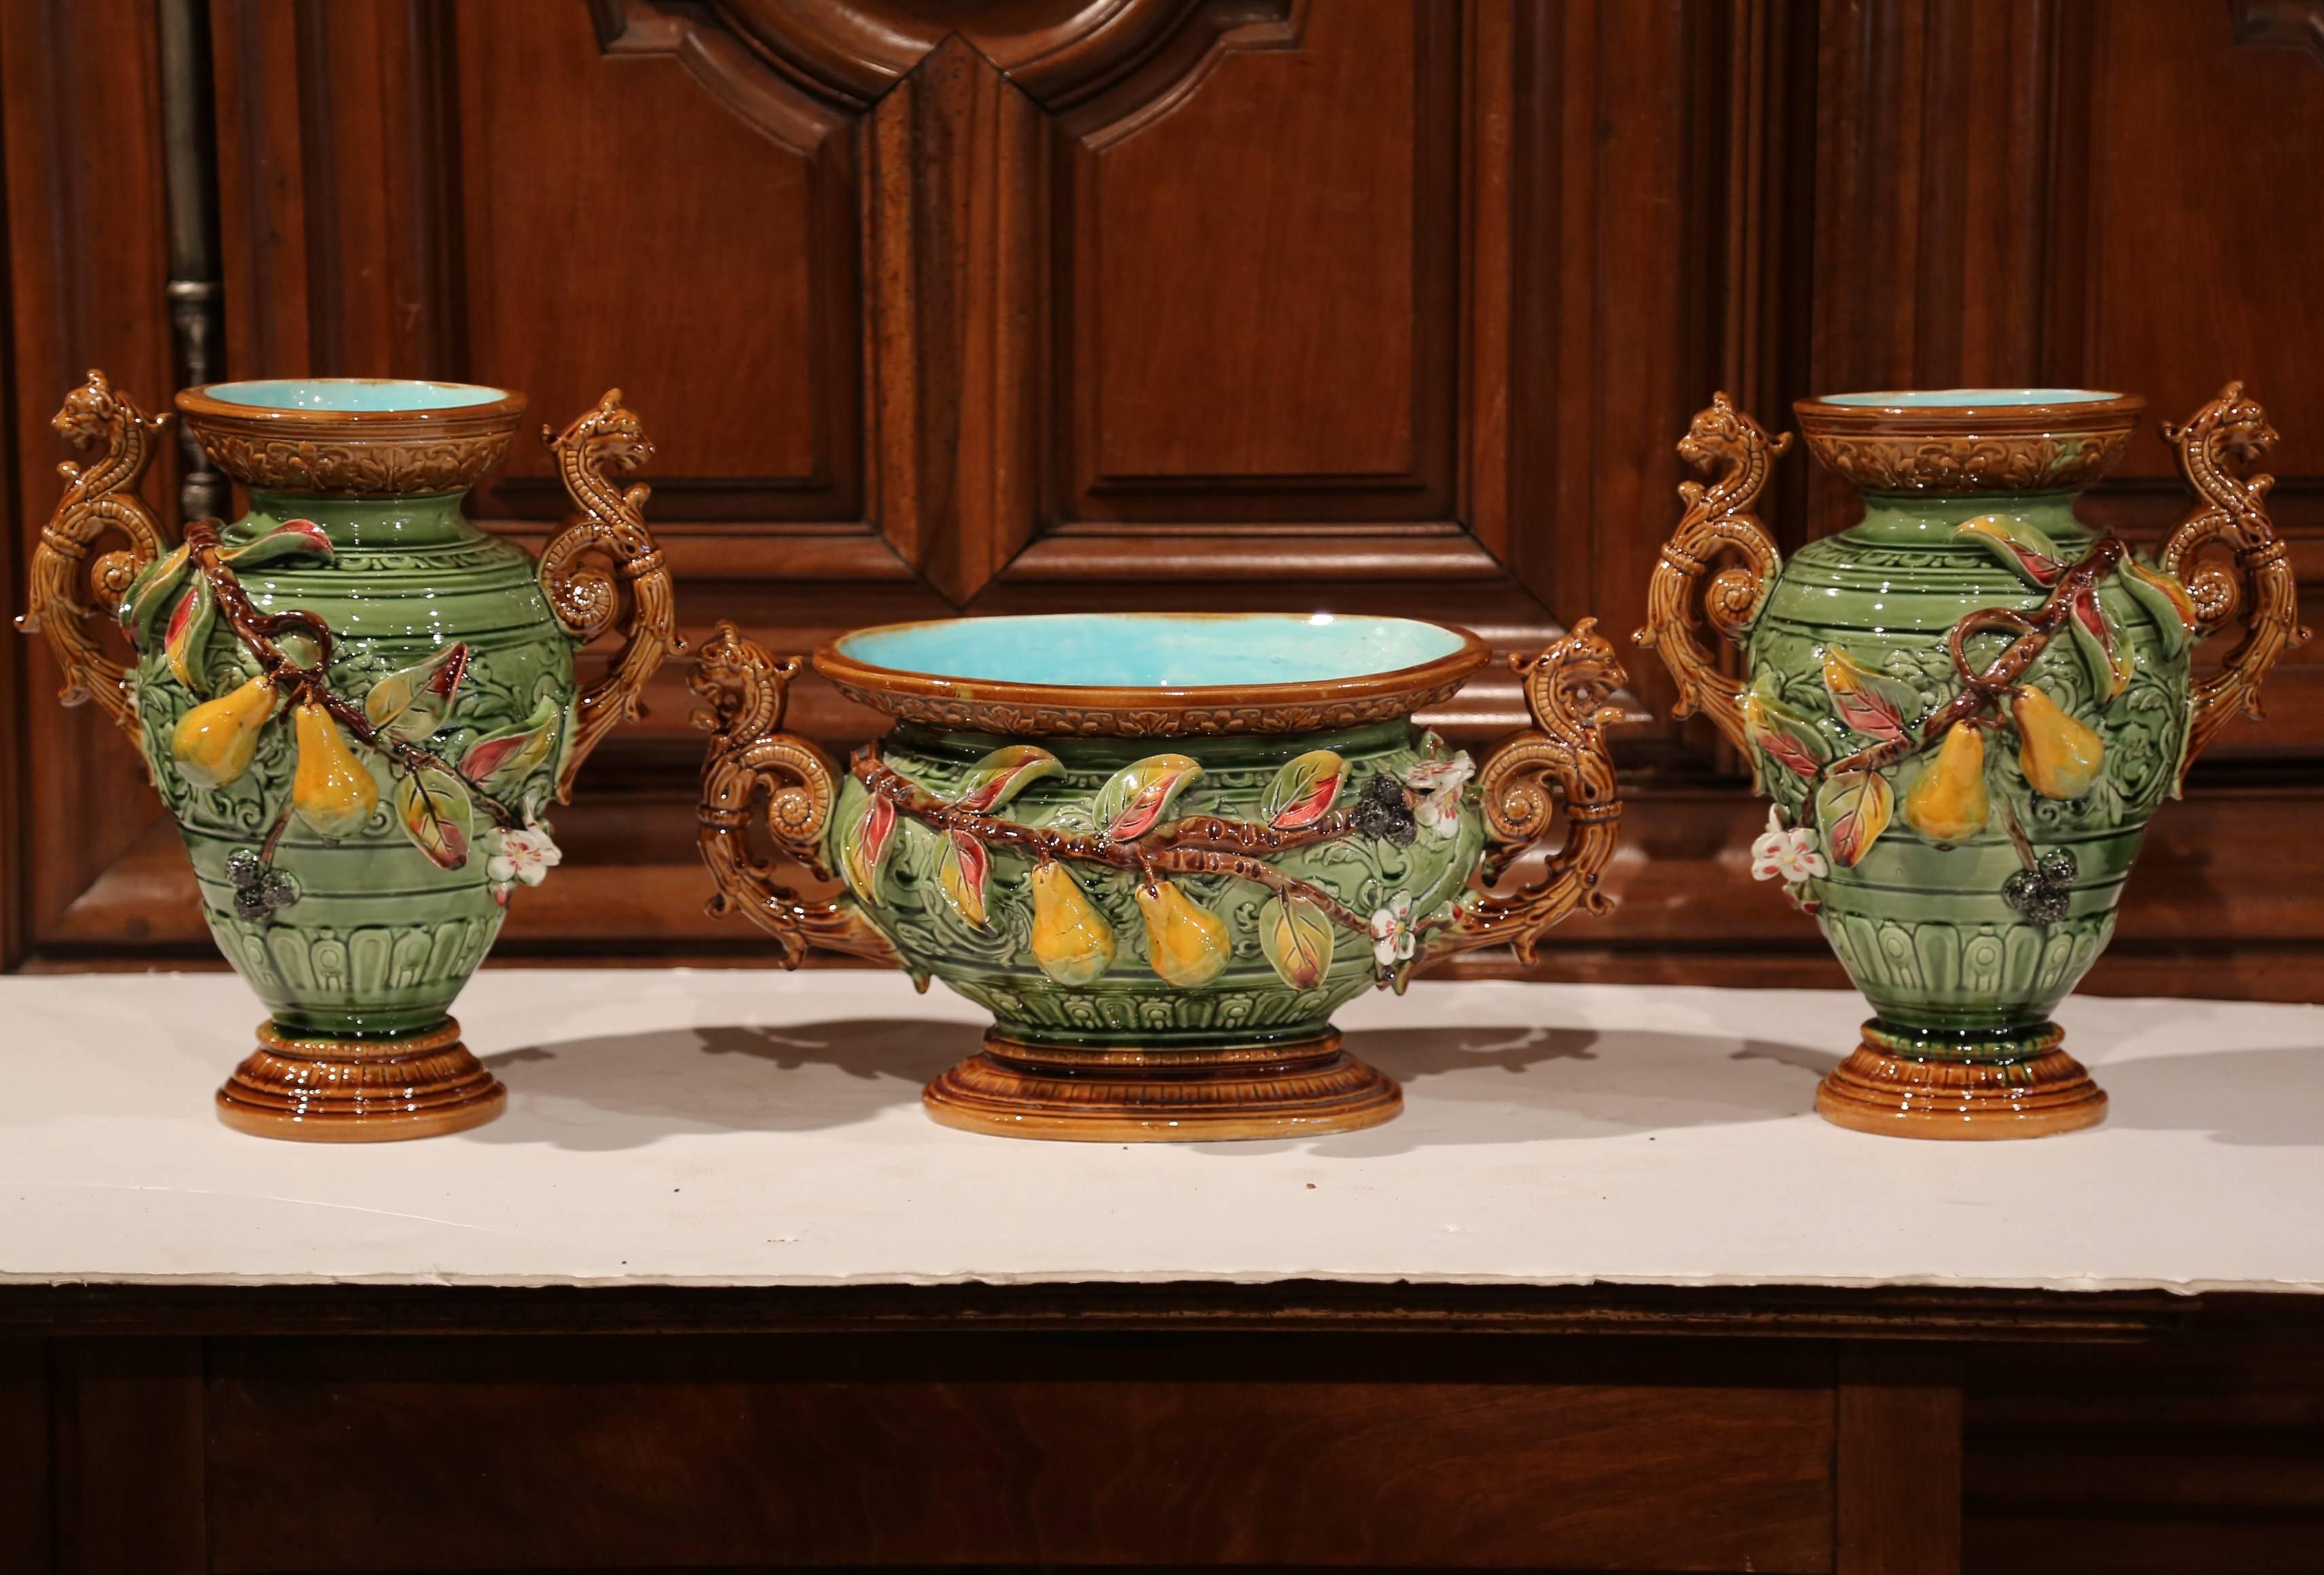 This beautiful three-piece set has two Majolica vases and a matching planter; crafted in Southern France, circa 1880, this composition is an impressive, Classic example of barbotine artistry. The sculptural, ceramic pieces features a nature-inspired